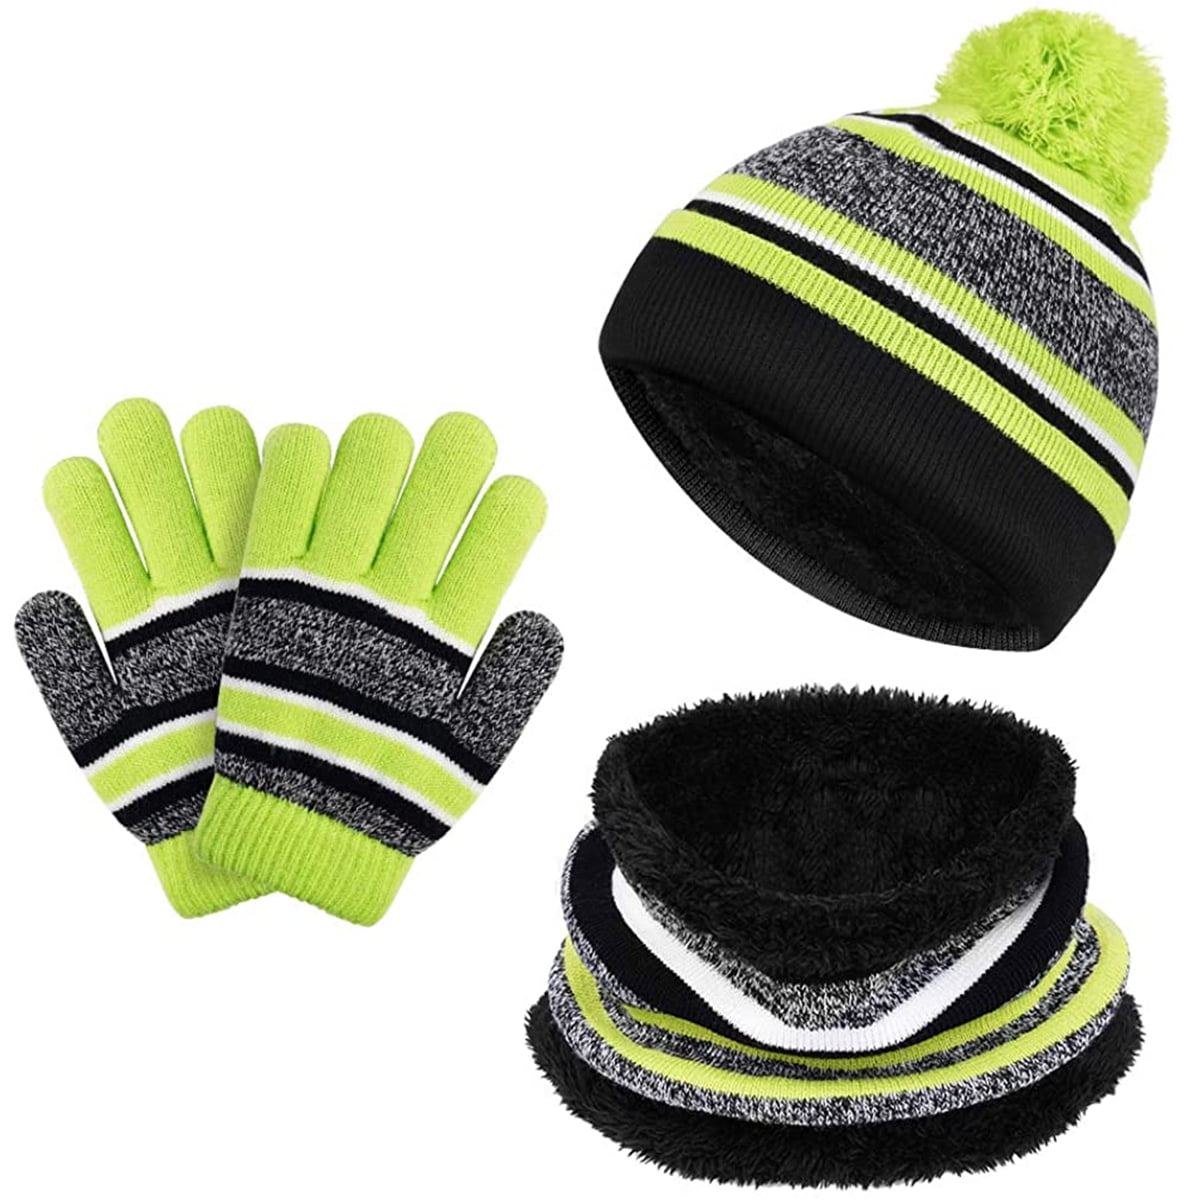 Winter Kids Hat Scarf and Gloves 3Pcs Set for Boys and Girls Toddler Age 3-6 Striped Pom Beanie Glove Neck Wamrm Maylisacc 